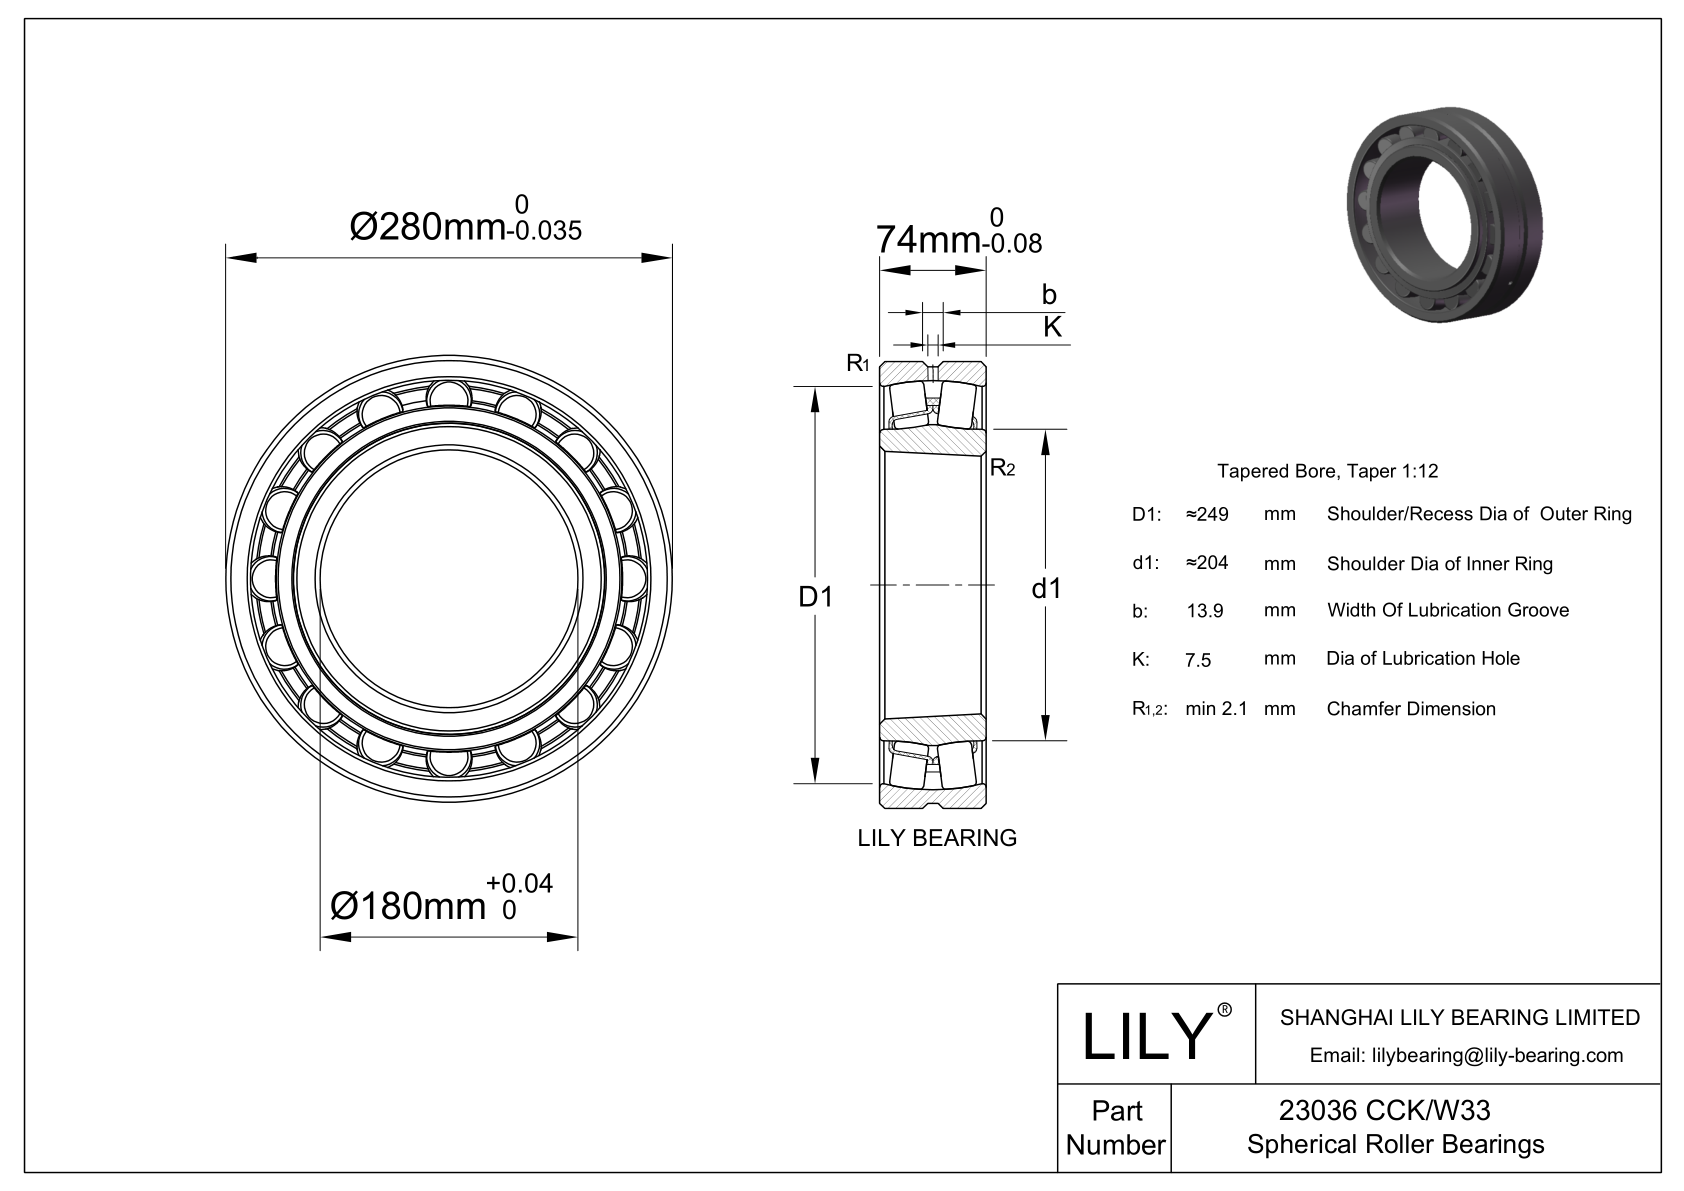 23036 CCK/W33 Double Row Spherical Roller Bearing cad drawing